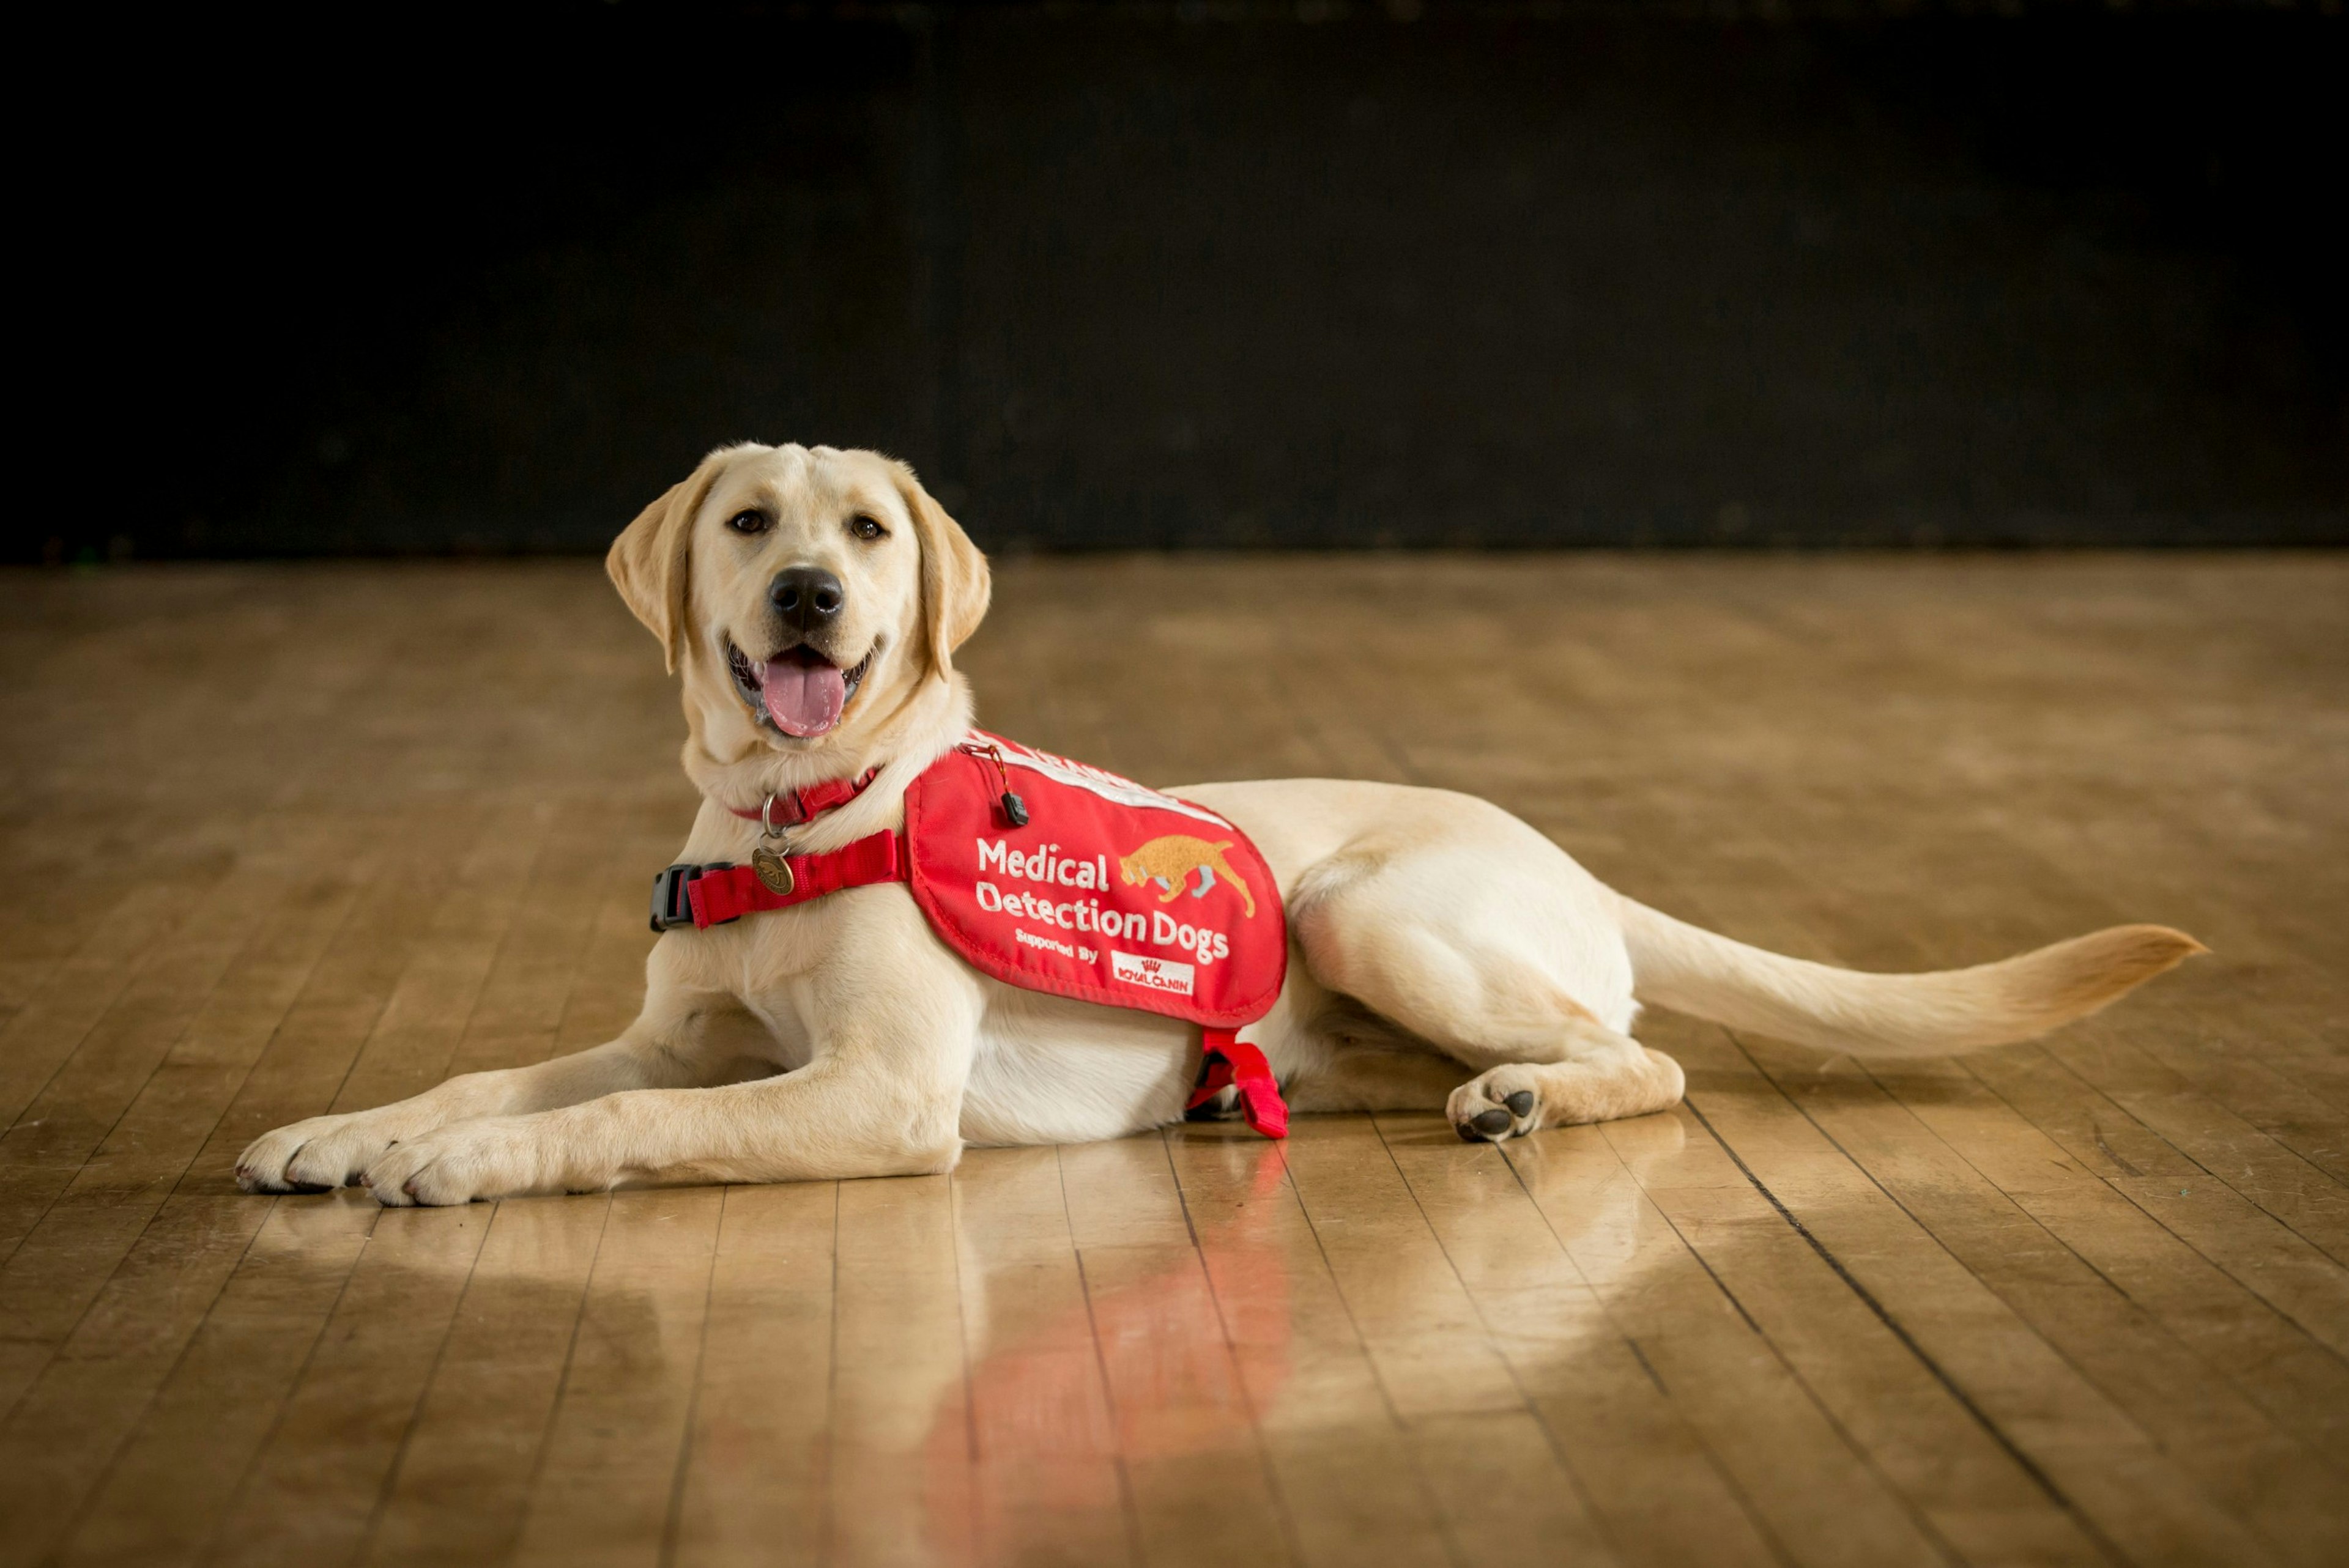 Medical detection dog Star is being trained to detect COVID-19